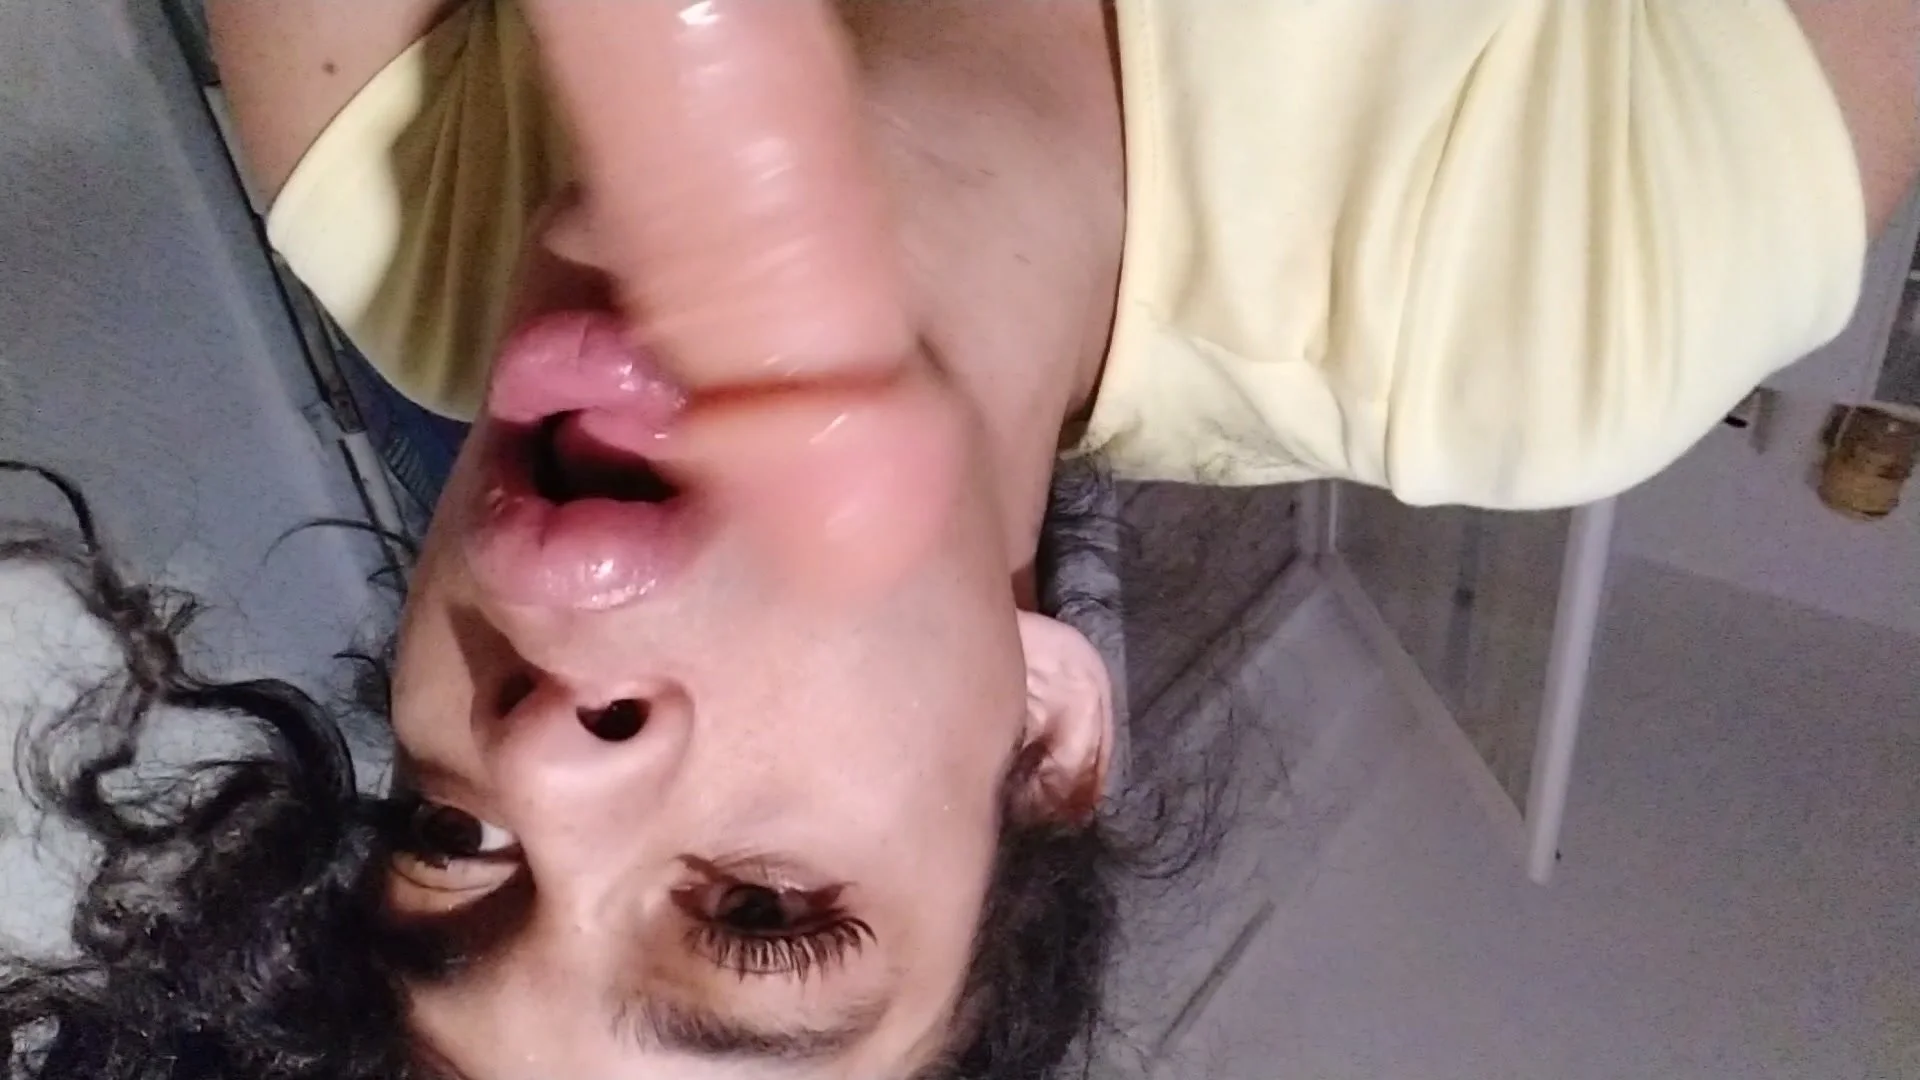 Siccy CD teen pumped lips blowjob picture